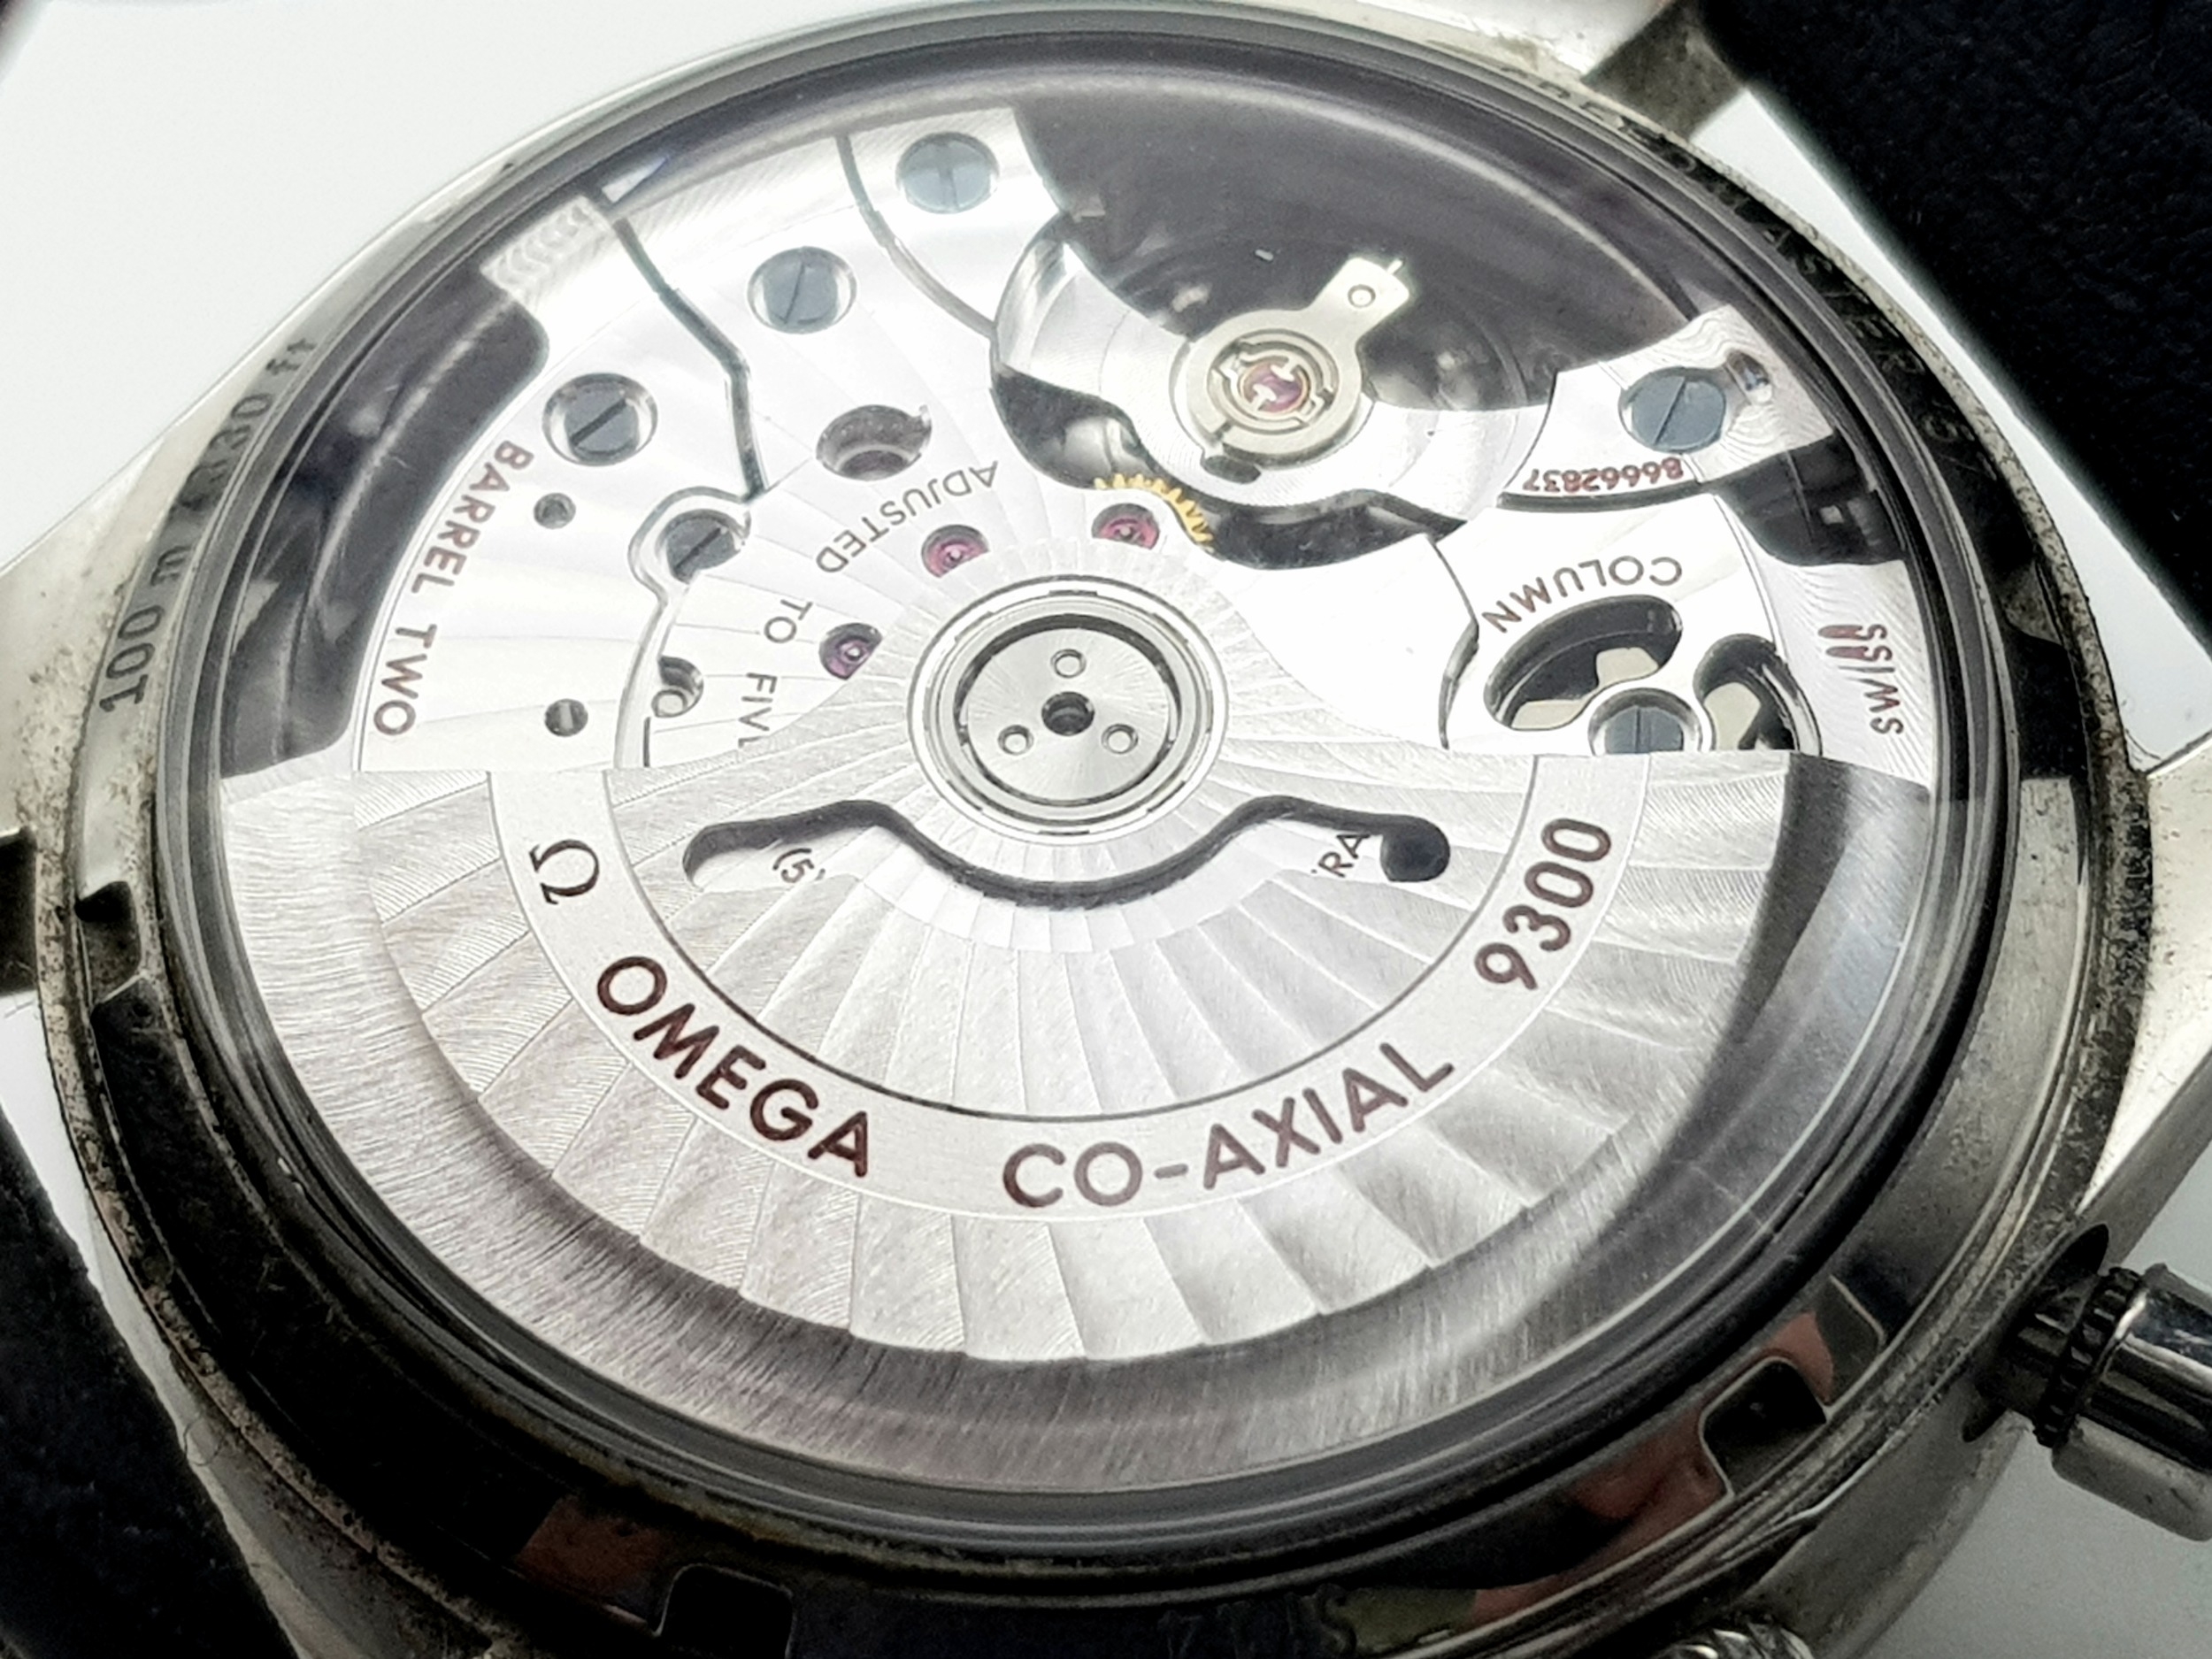 An Omega Speedmaster Automatic Co-Axial Chronograph Gents Watch. Black leather tag strap. - Image 6 of 7